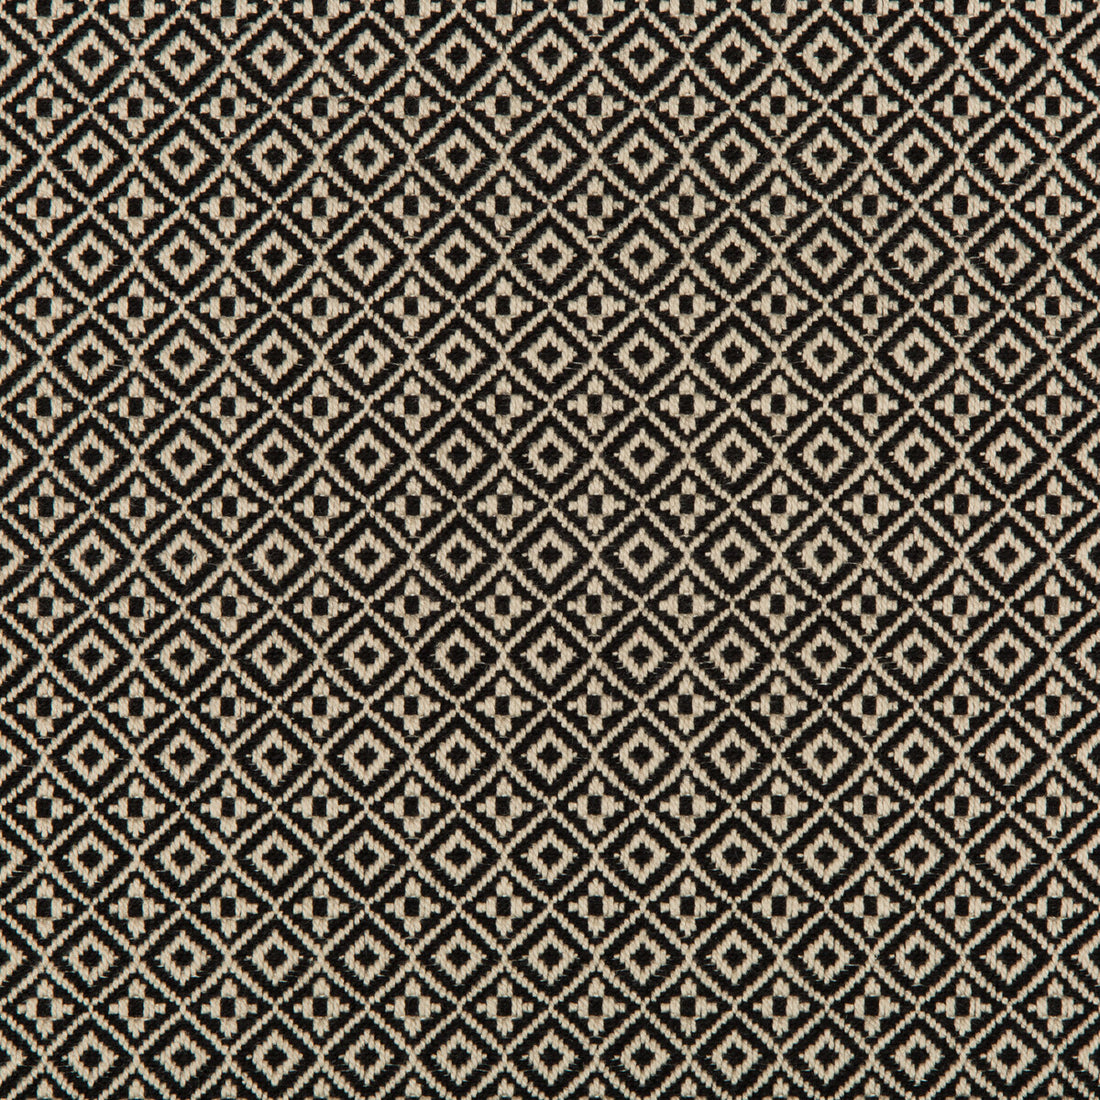 Attribute Grid fabric in nero color - pattern 35403.816.0 - by Kravet Design in the Nate Berkus Well-Traveled collection